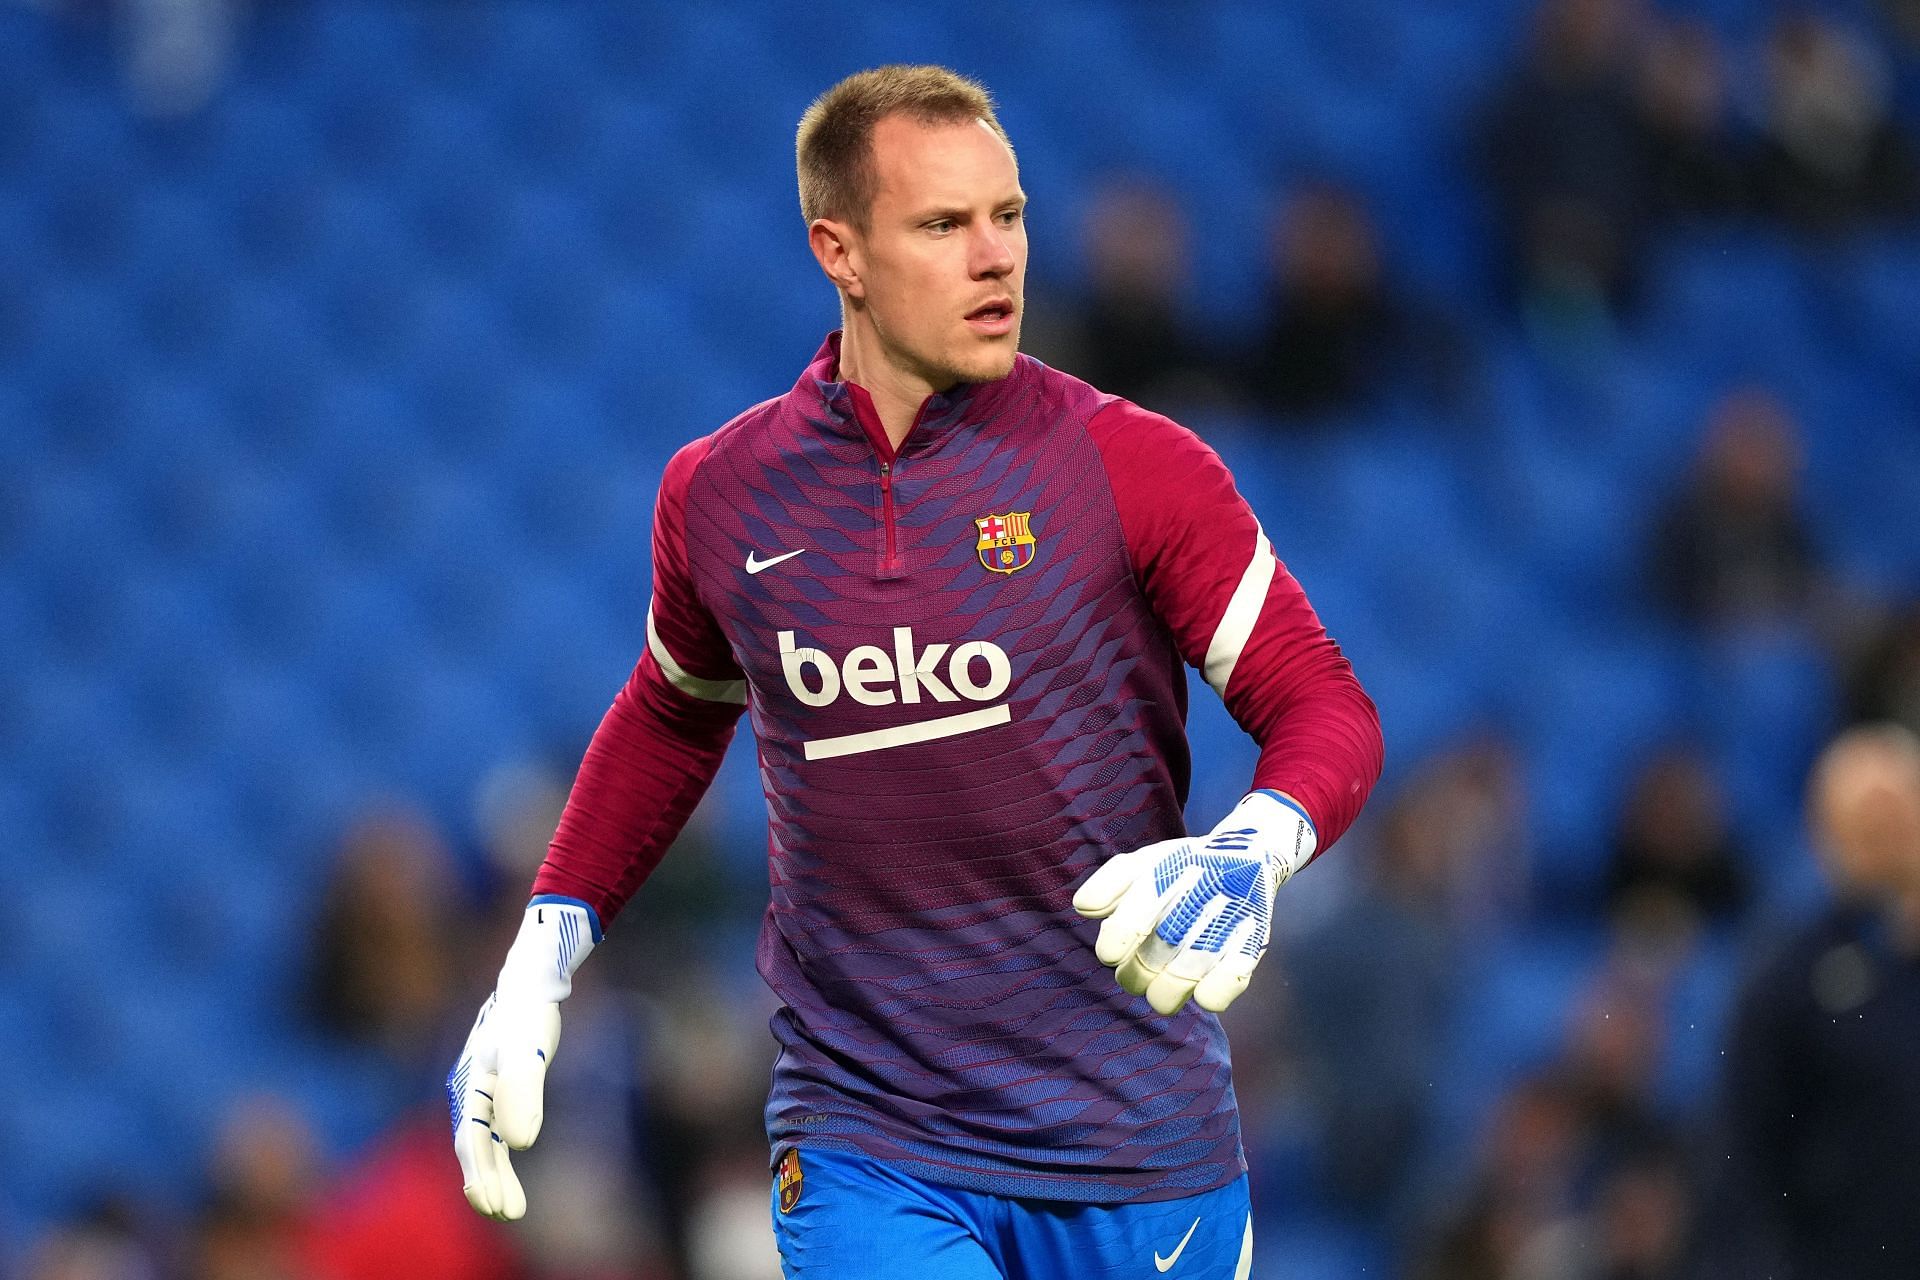 Marc-Andre ter Stegen made some crucial saves in the second-half